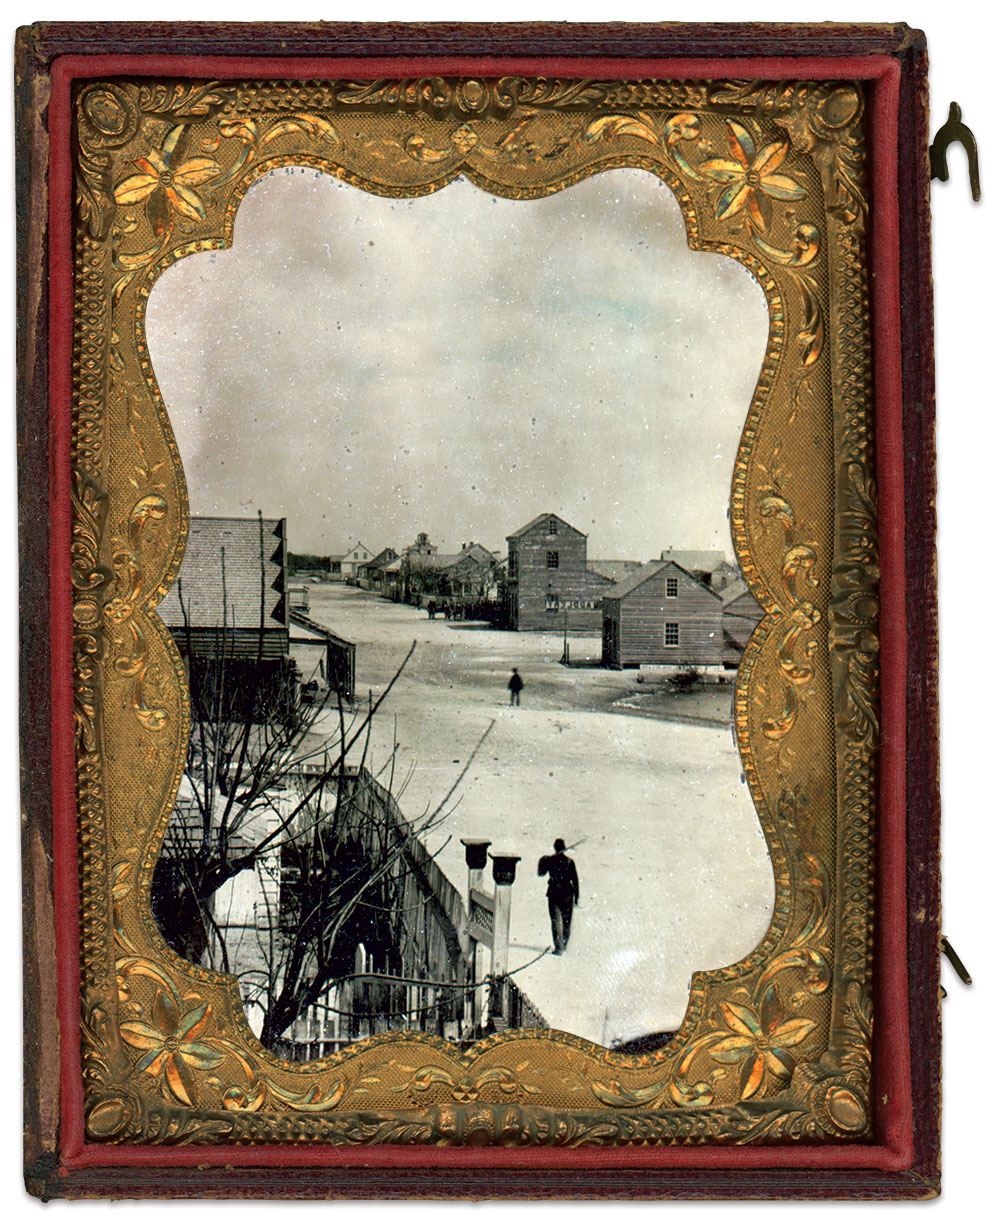 Quarter-plate tintype by an unidentified photographer. Rich Jahn Collection.